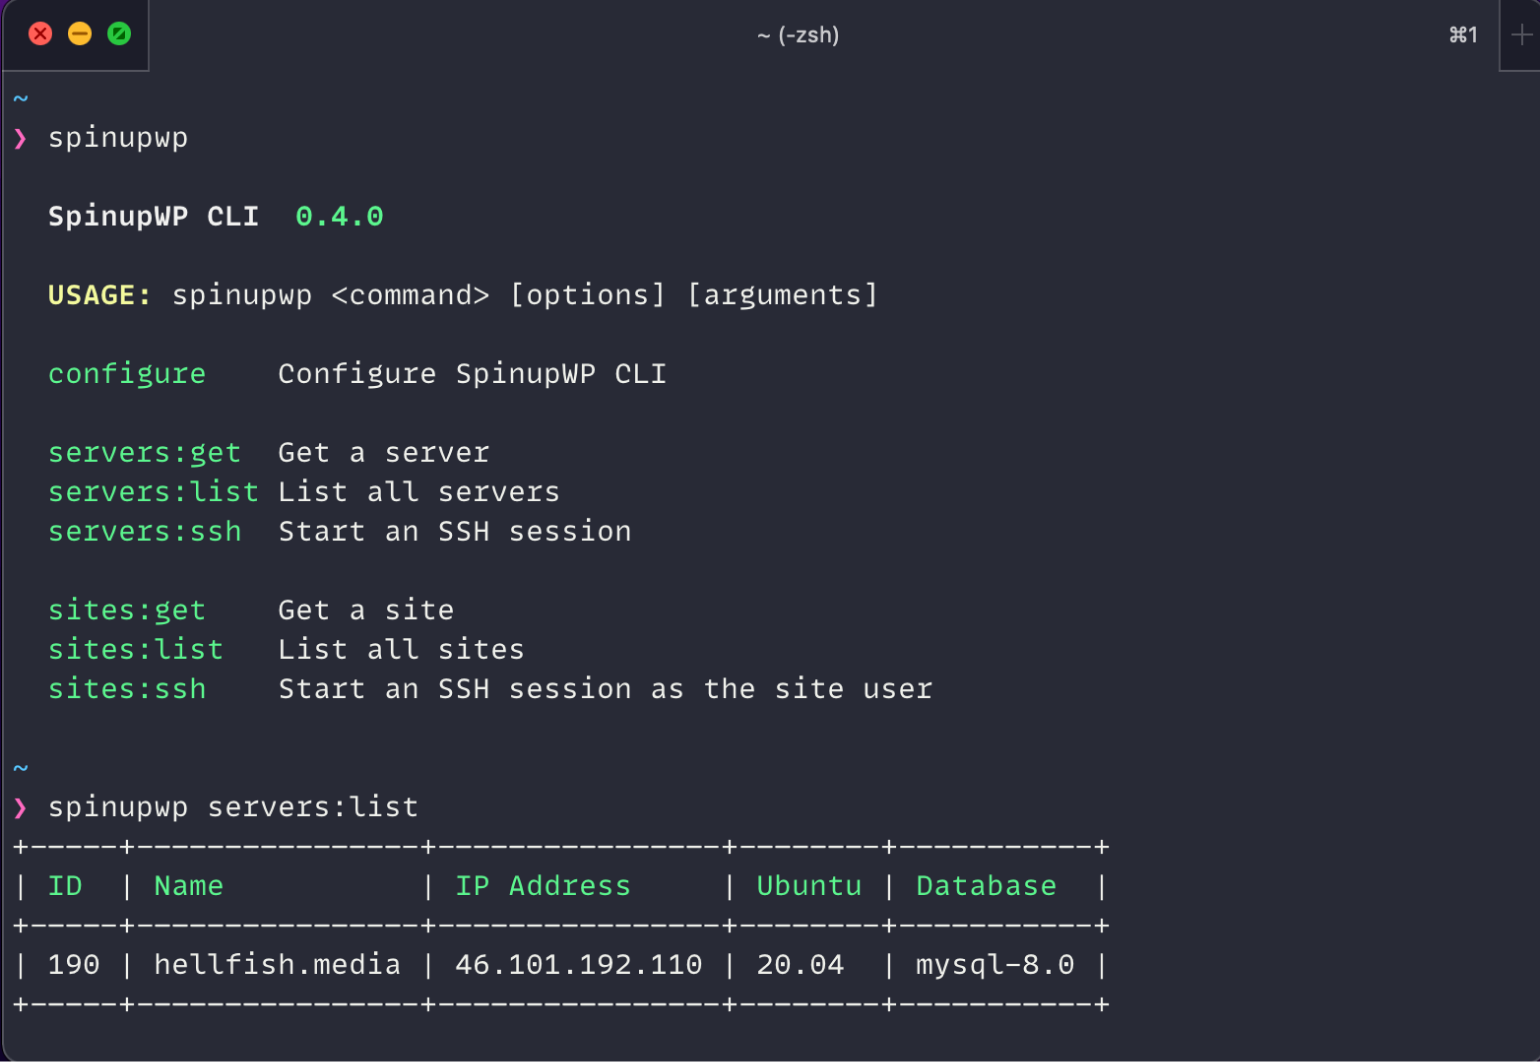 A view of the SpinupWP command line interface.